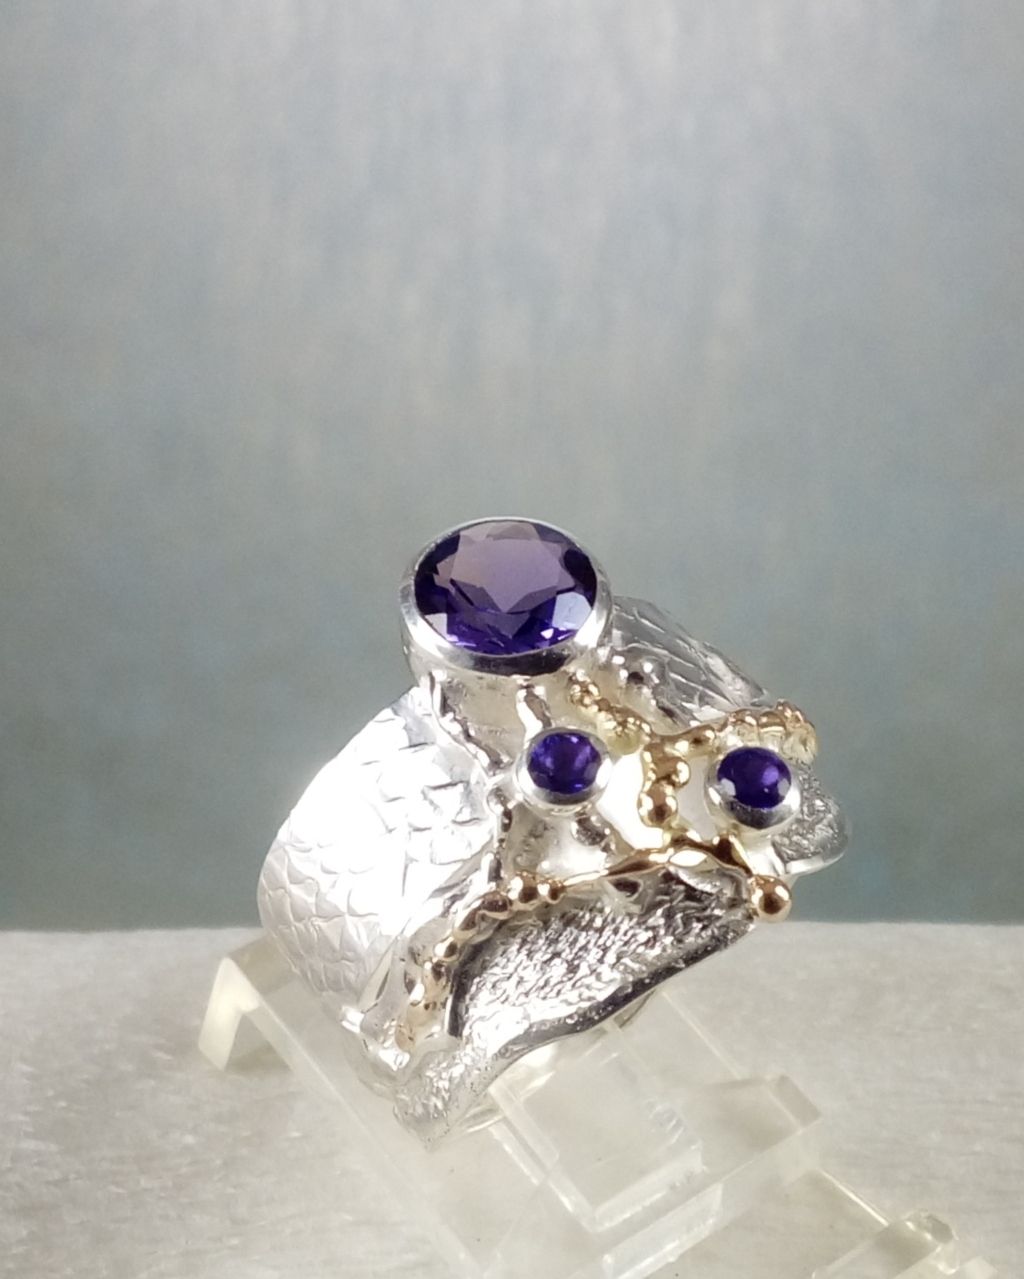 ,luxury goods and jewelry for women, rings from 14 karat gold and silver for women, handcrafted rings for women with amethyst, sterling silver and 14k gold ring, gregory pyra piro ring 6820